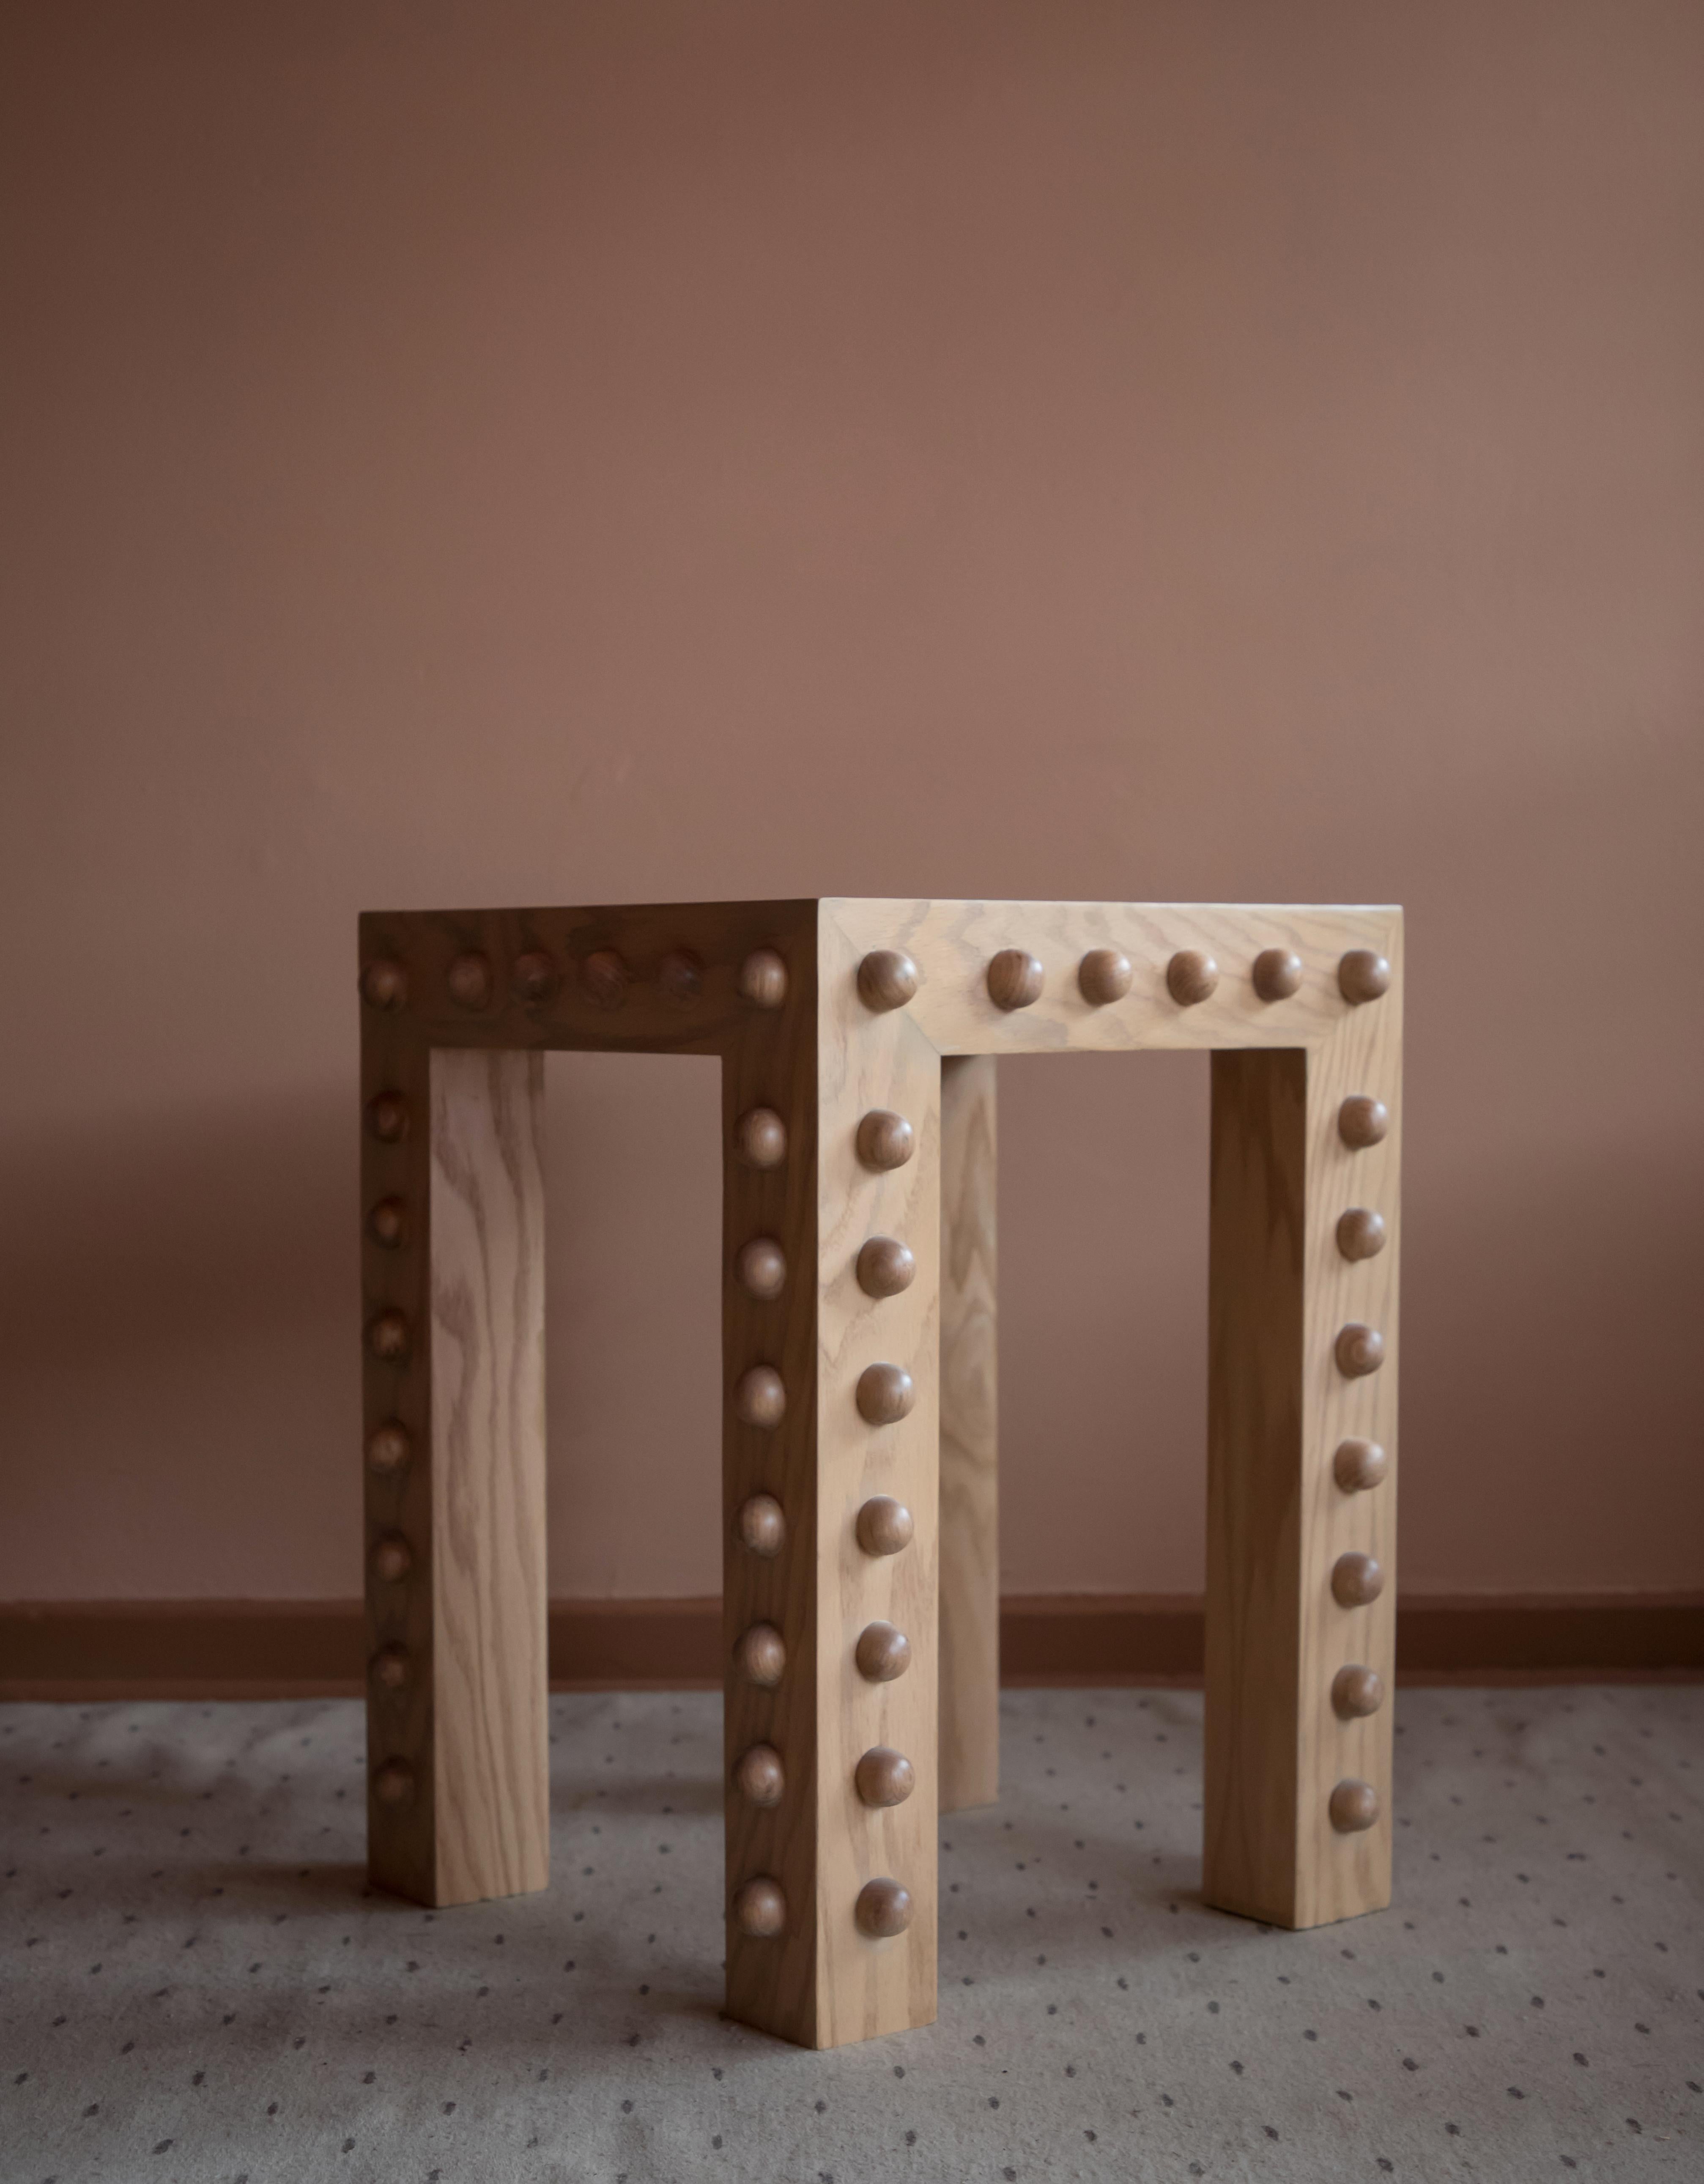 Jaguar side table by Andres Gutierrez.
Dimensions: D45 x W45 x H60 cm.
Materials: Body: Pine structure and white oak plywood. Hives: Solid white oak.

Andrés Gutiérrez founded A-G Studio, a residential and commercial interior design firm in